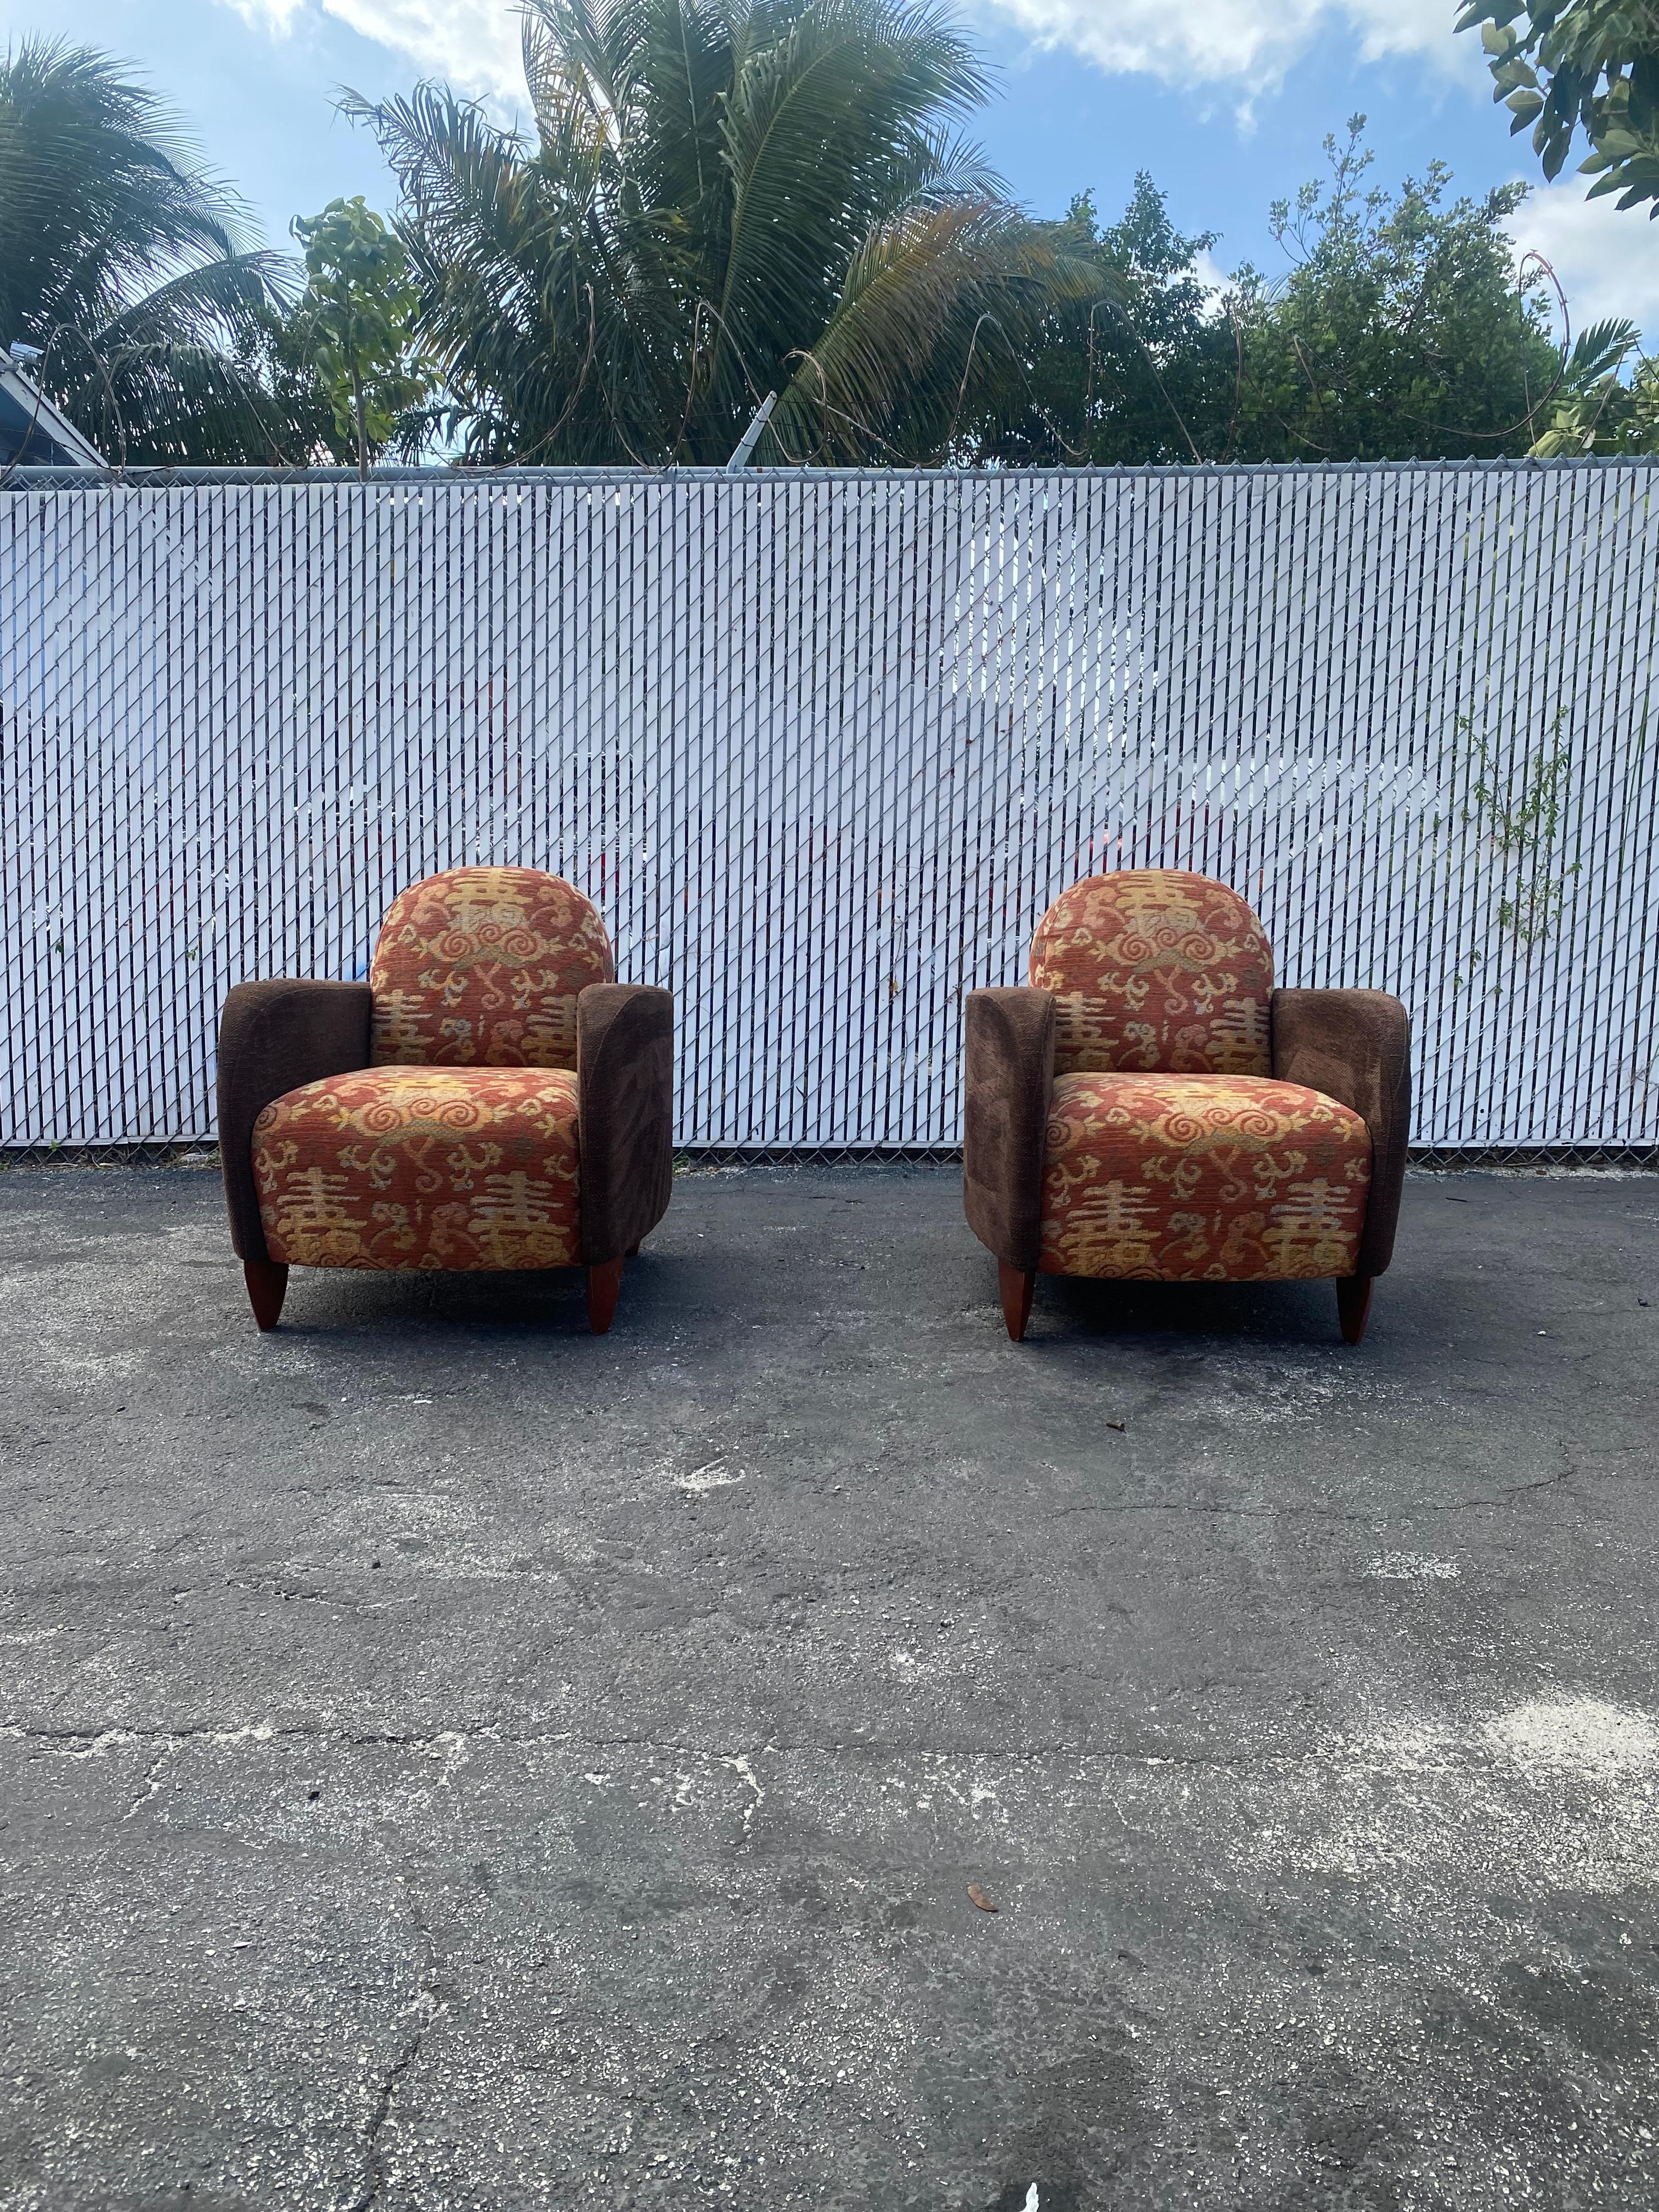 Upholstery 1970s Sculptural Art Deco Chenille Walnut Curved Chairs, Set of 2 For Sale